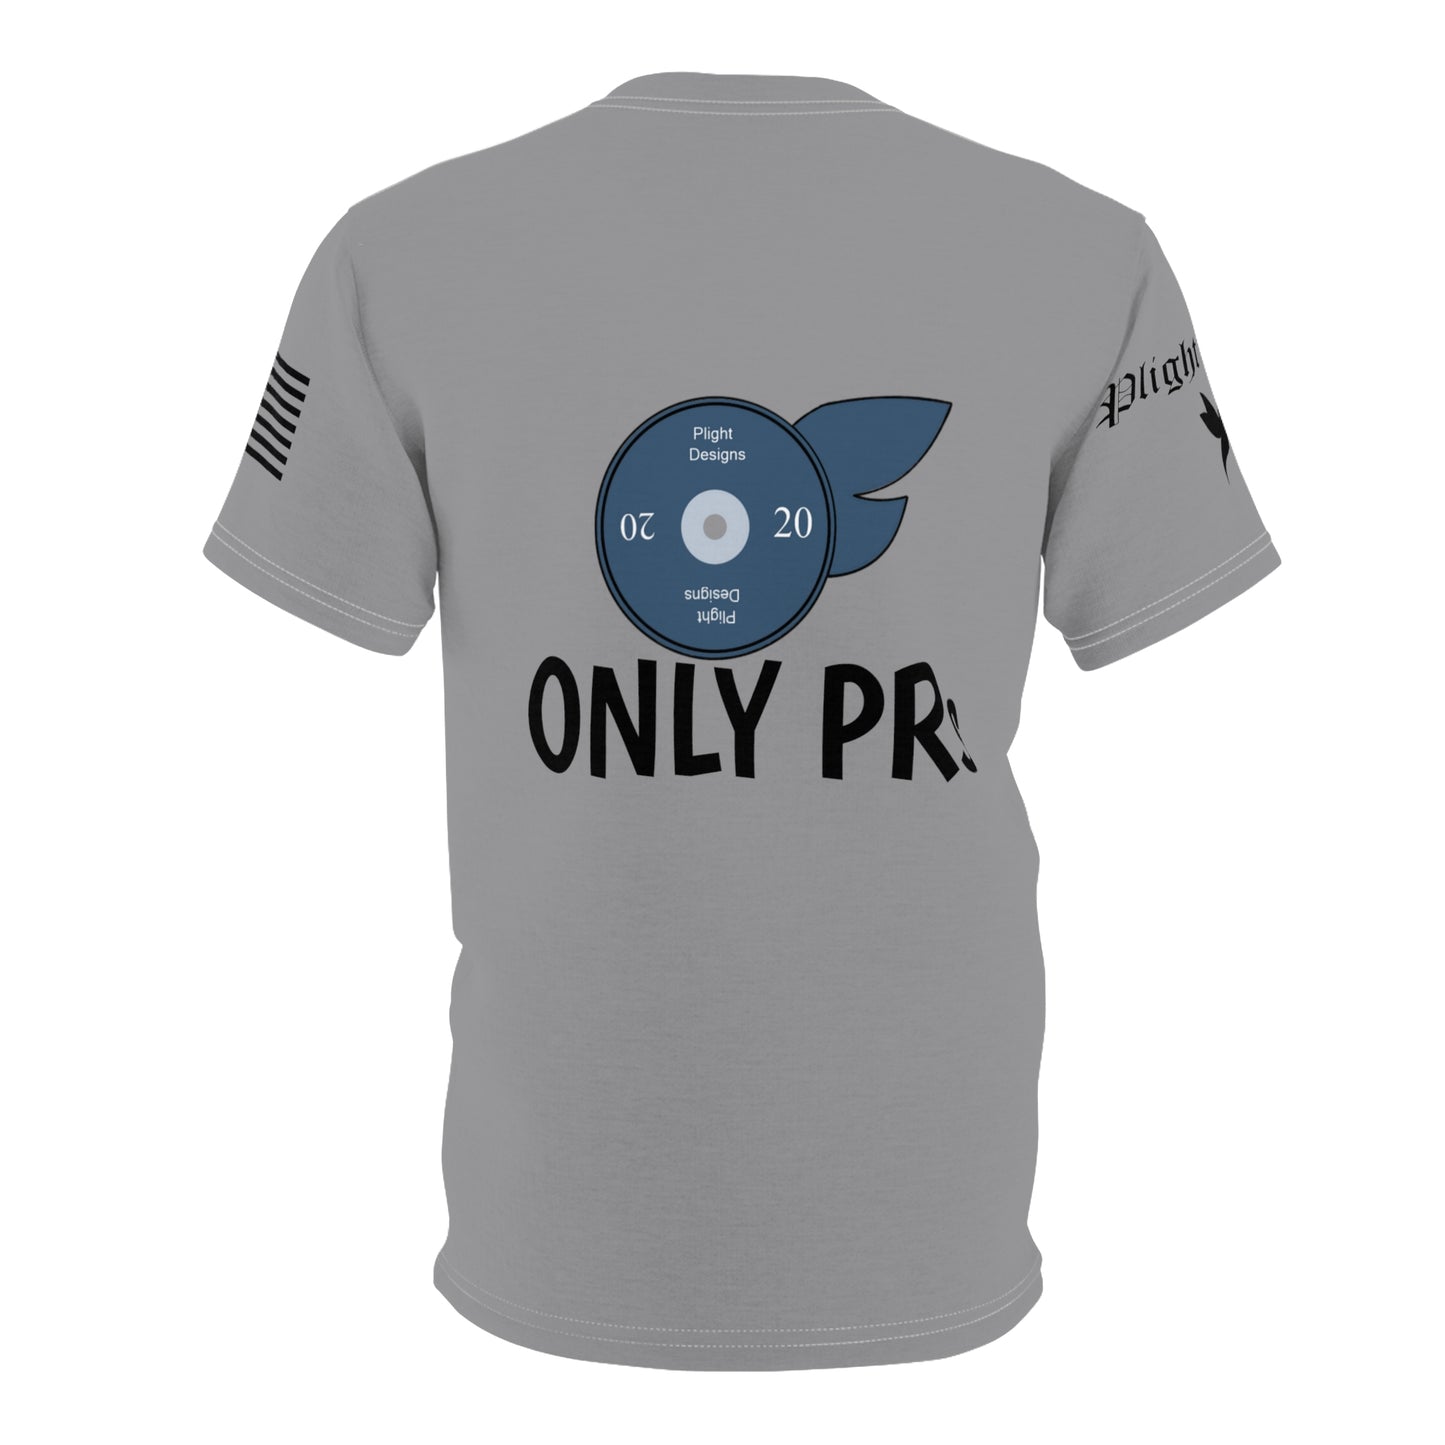 Only PRs Unisex shirt